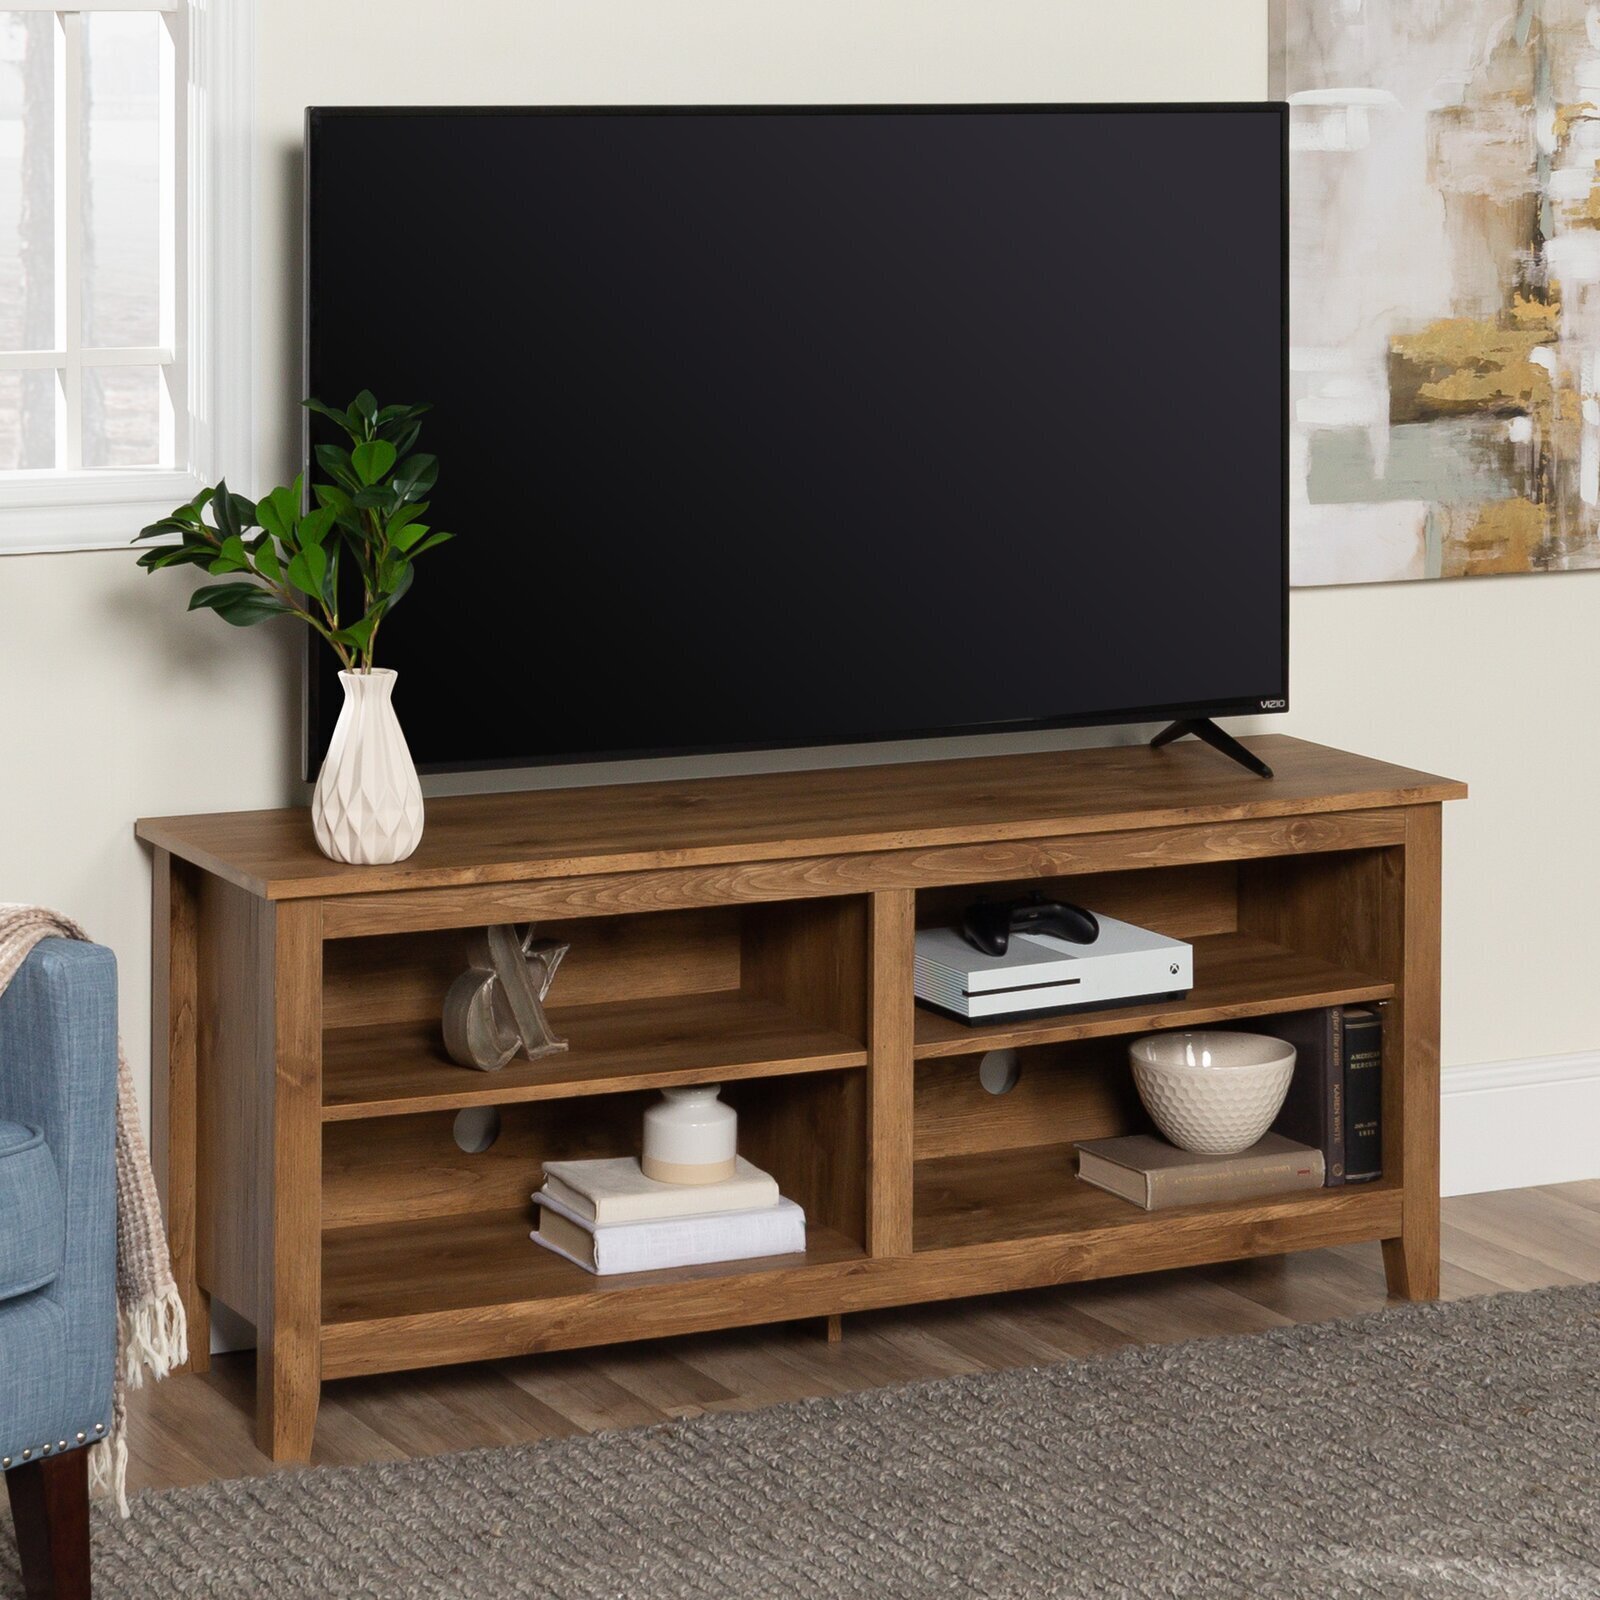 Compact and Rustic Modern TV Cabinet